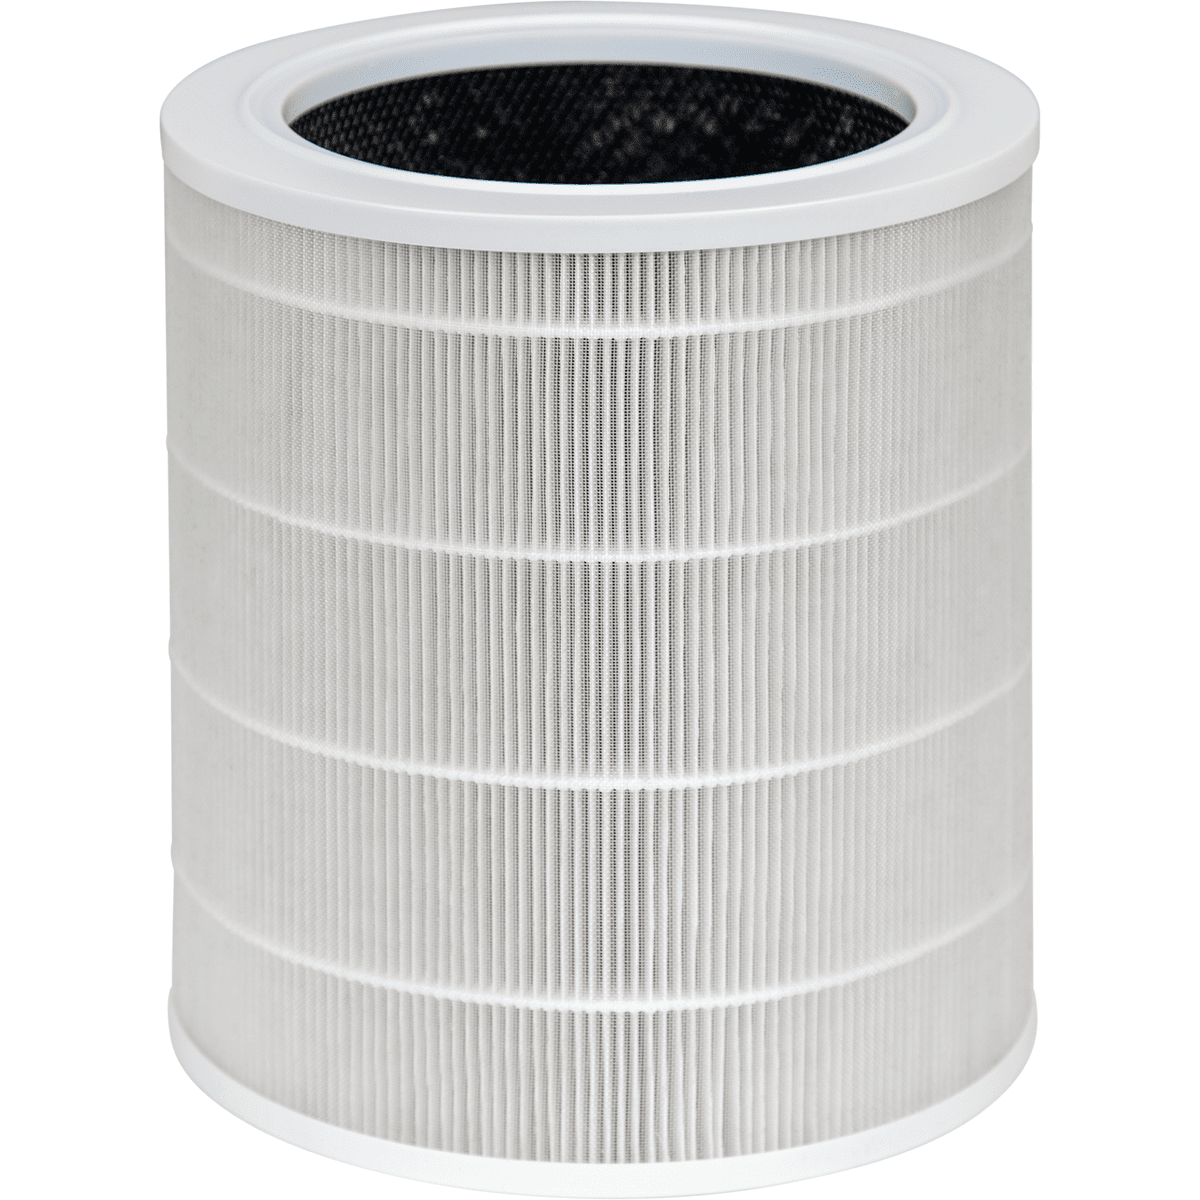 Santa Fe HEPA Replacement Filter for Air Purifier w/UV Sterilization